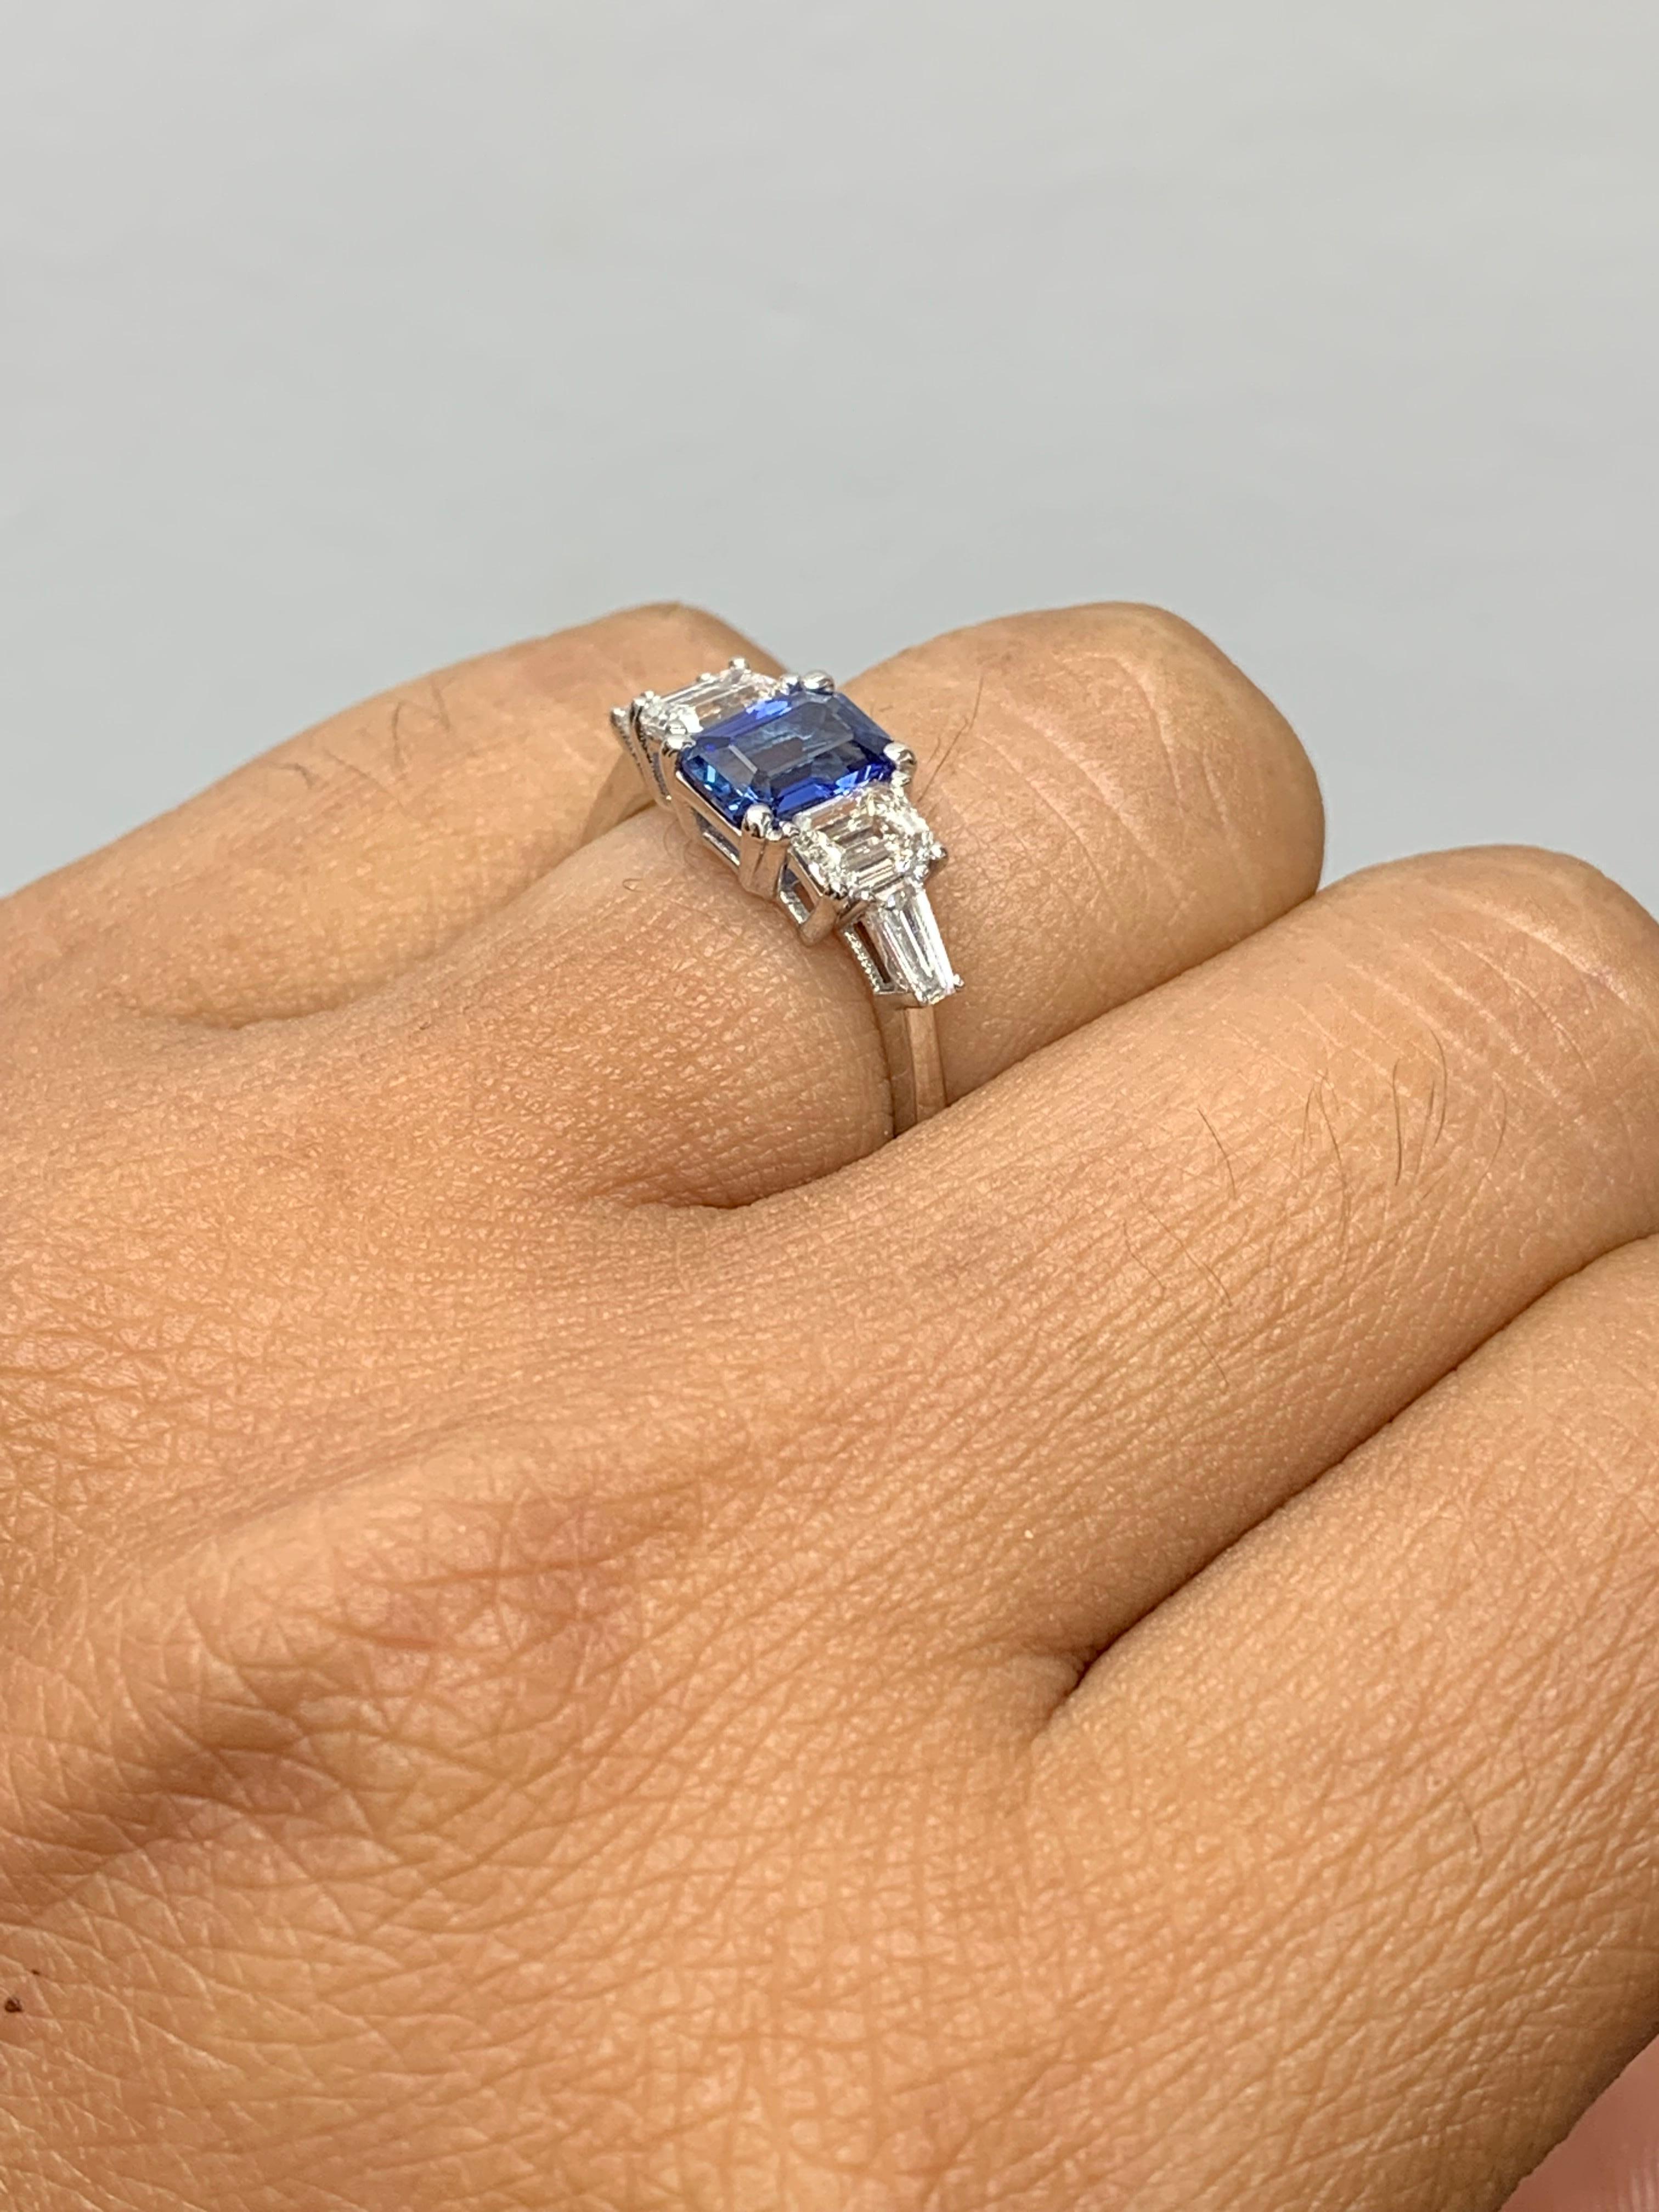 A stunning ring showcasing a rich intense emerald cut royal blue sapphire weighing 1.12 carats. Flanking the center stone are two emerald-cut diamonds weighing 0.64 carats and two baguette diamonds on each side weighing 0.21 carats in total, Made in